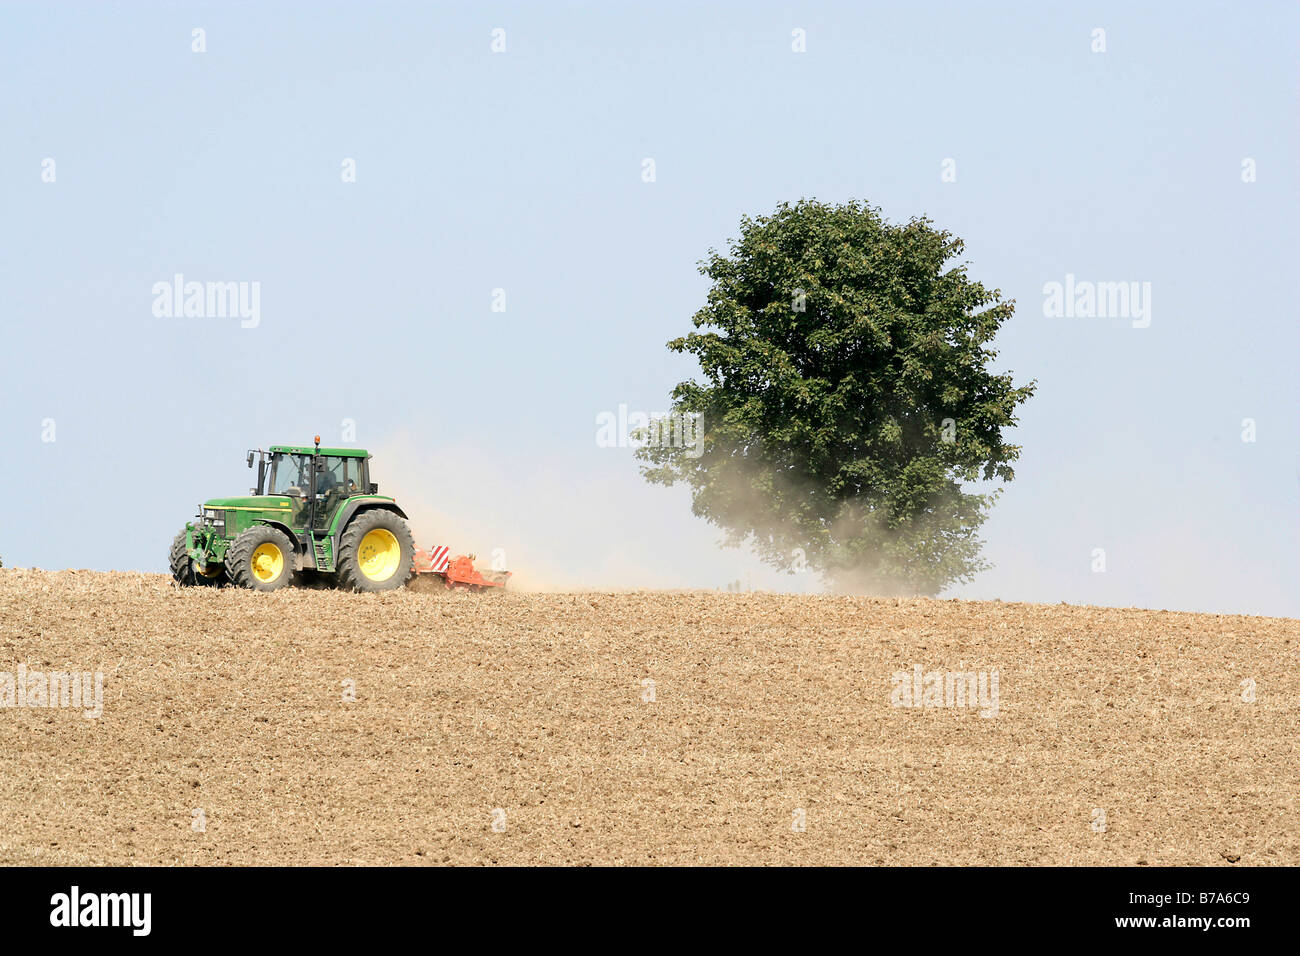 Agriculturist in a tractor ploughing a field near Regensburg, Bavaria, Germany, Europe Stock Photo